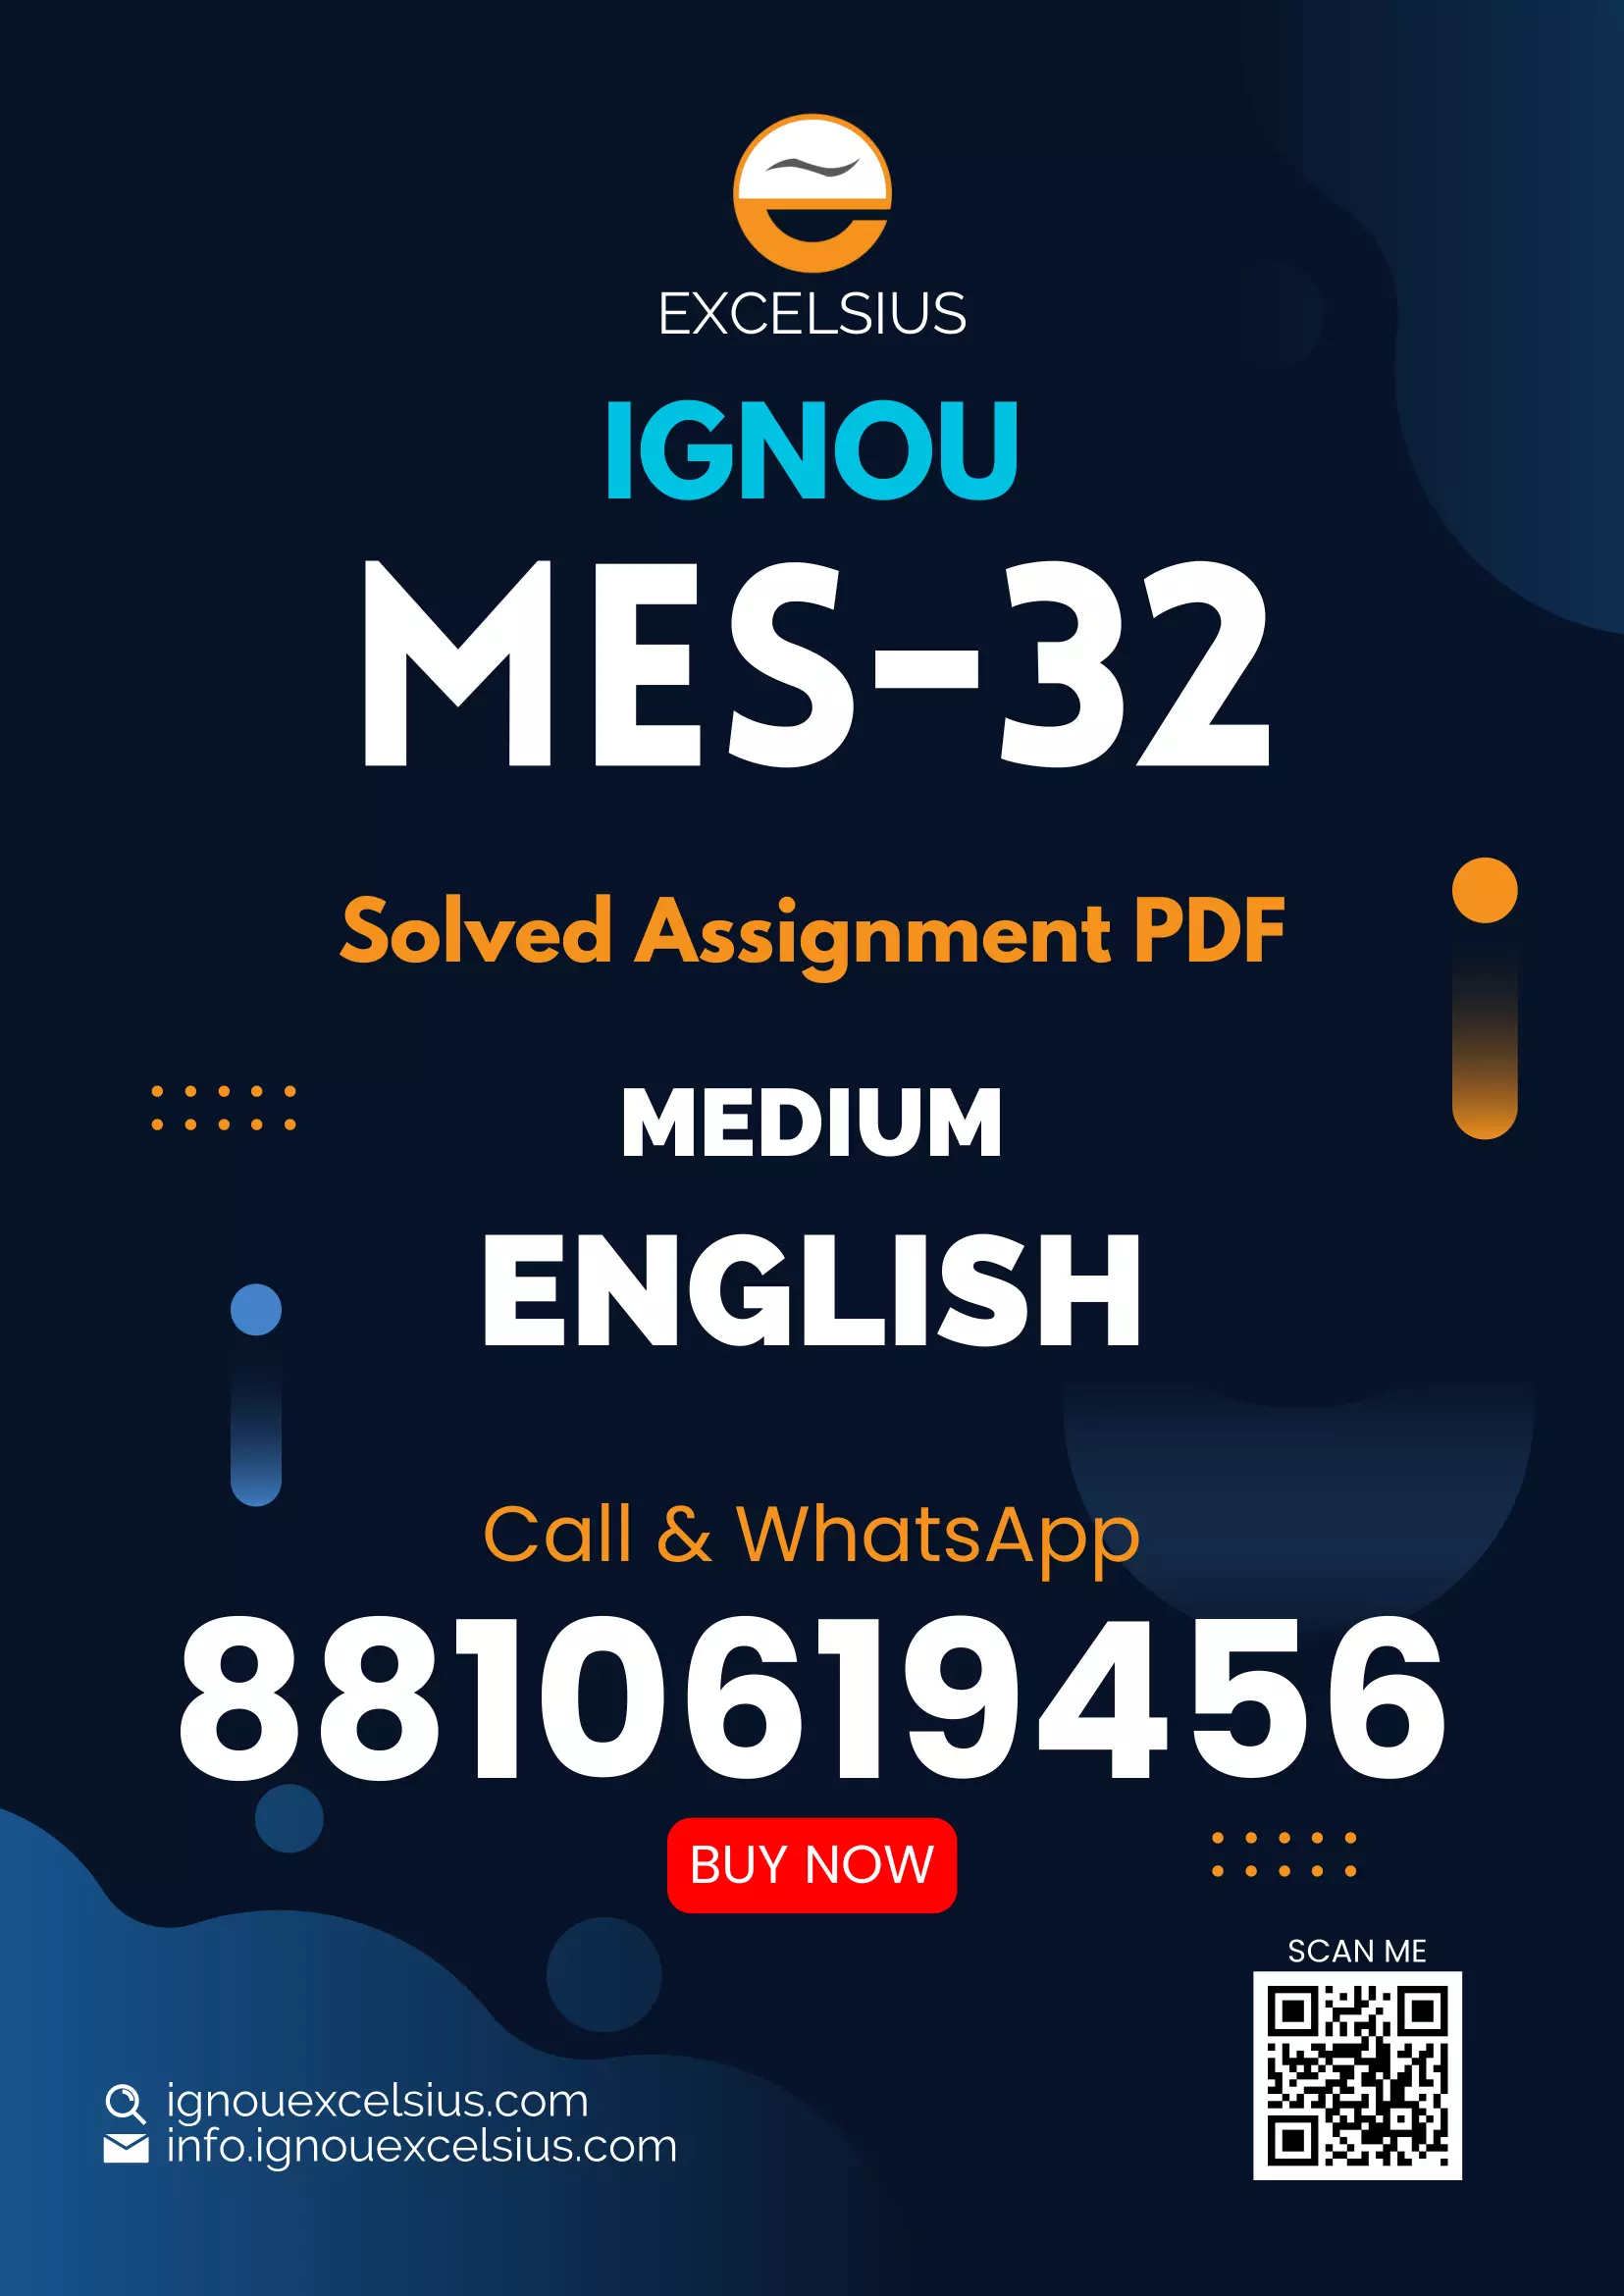 IGNOU MES-32 - Communication and Information Technology, Latest Solved Assignment-January 2023 - July 2023